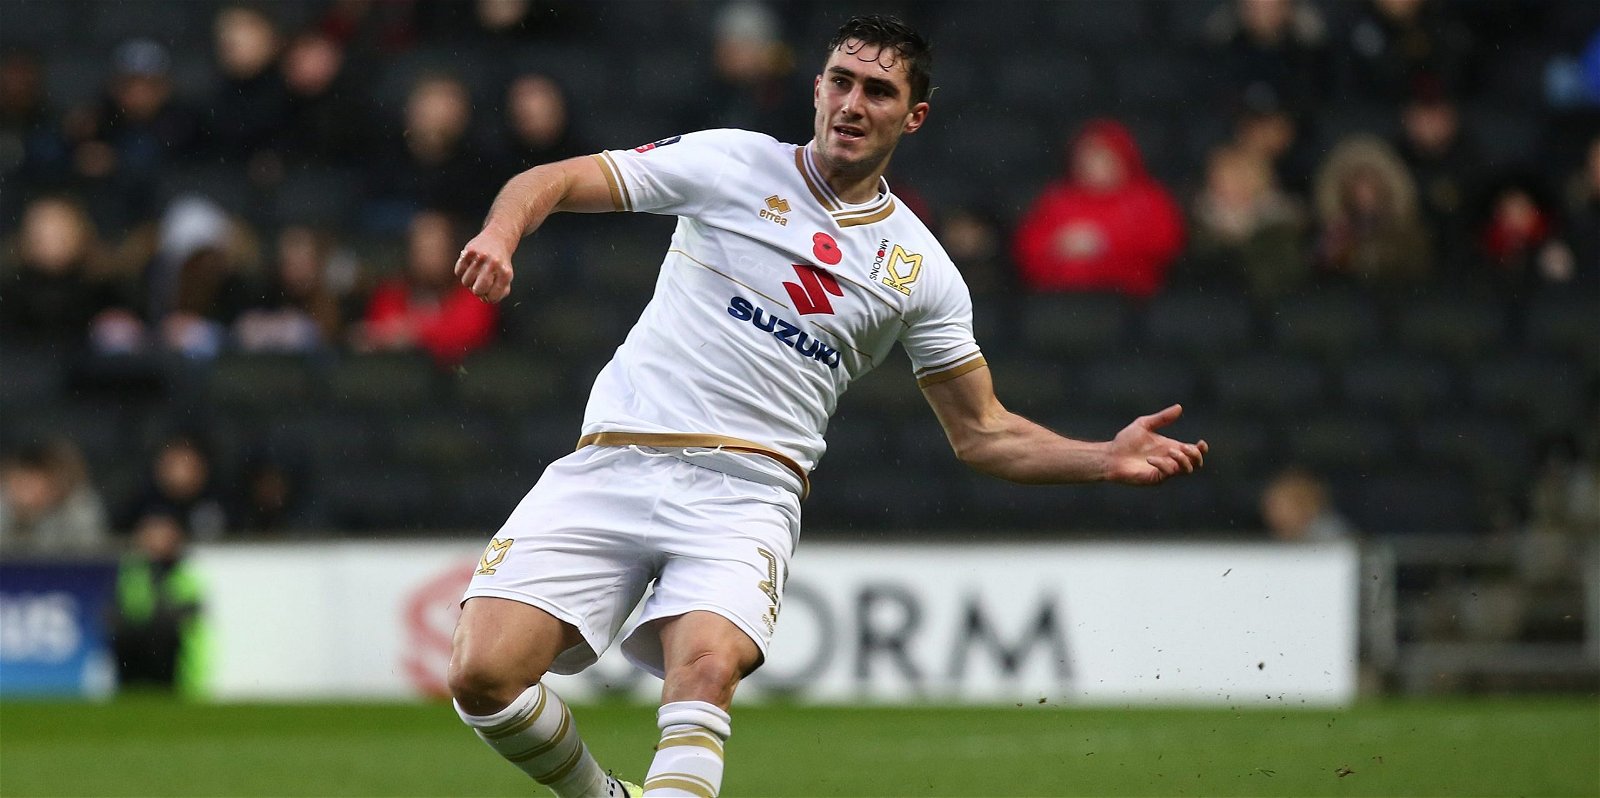 Moore-Taylor, Forest Green Rovers complete move for former MK Dons and Exeter City defender